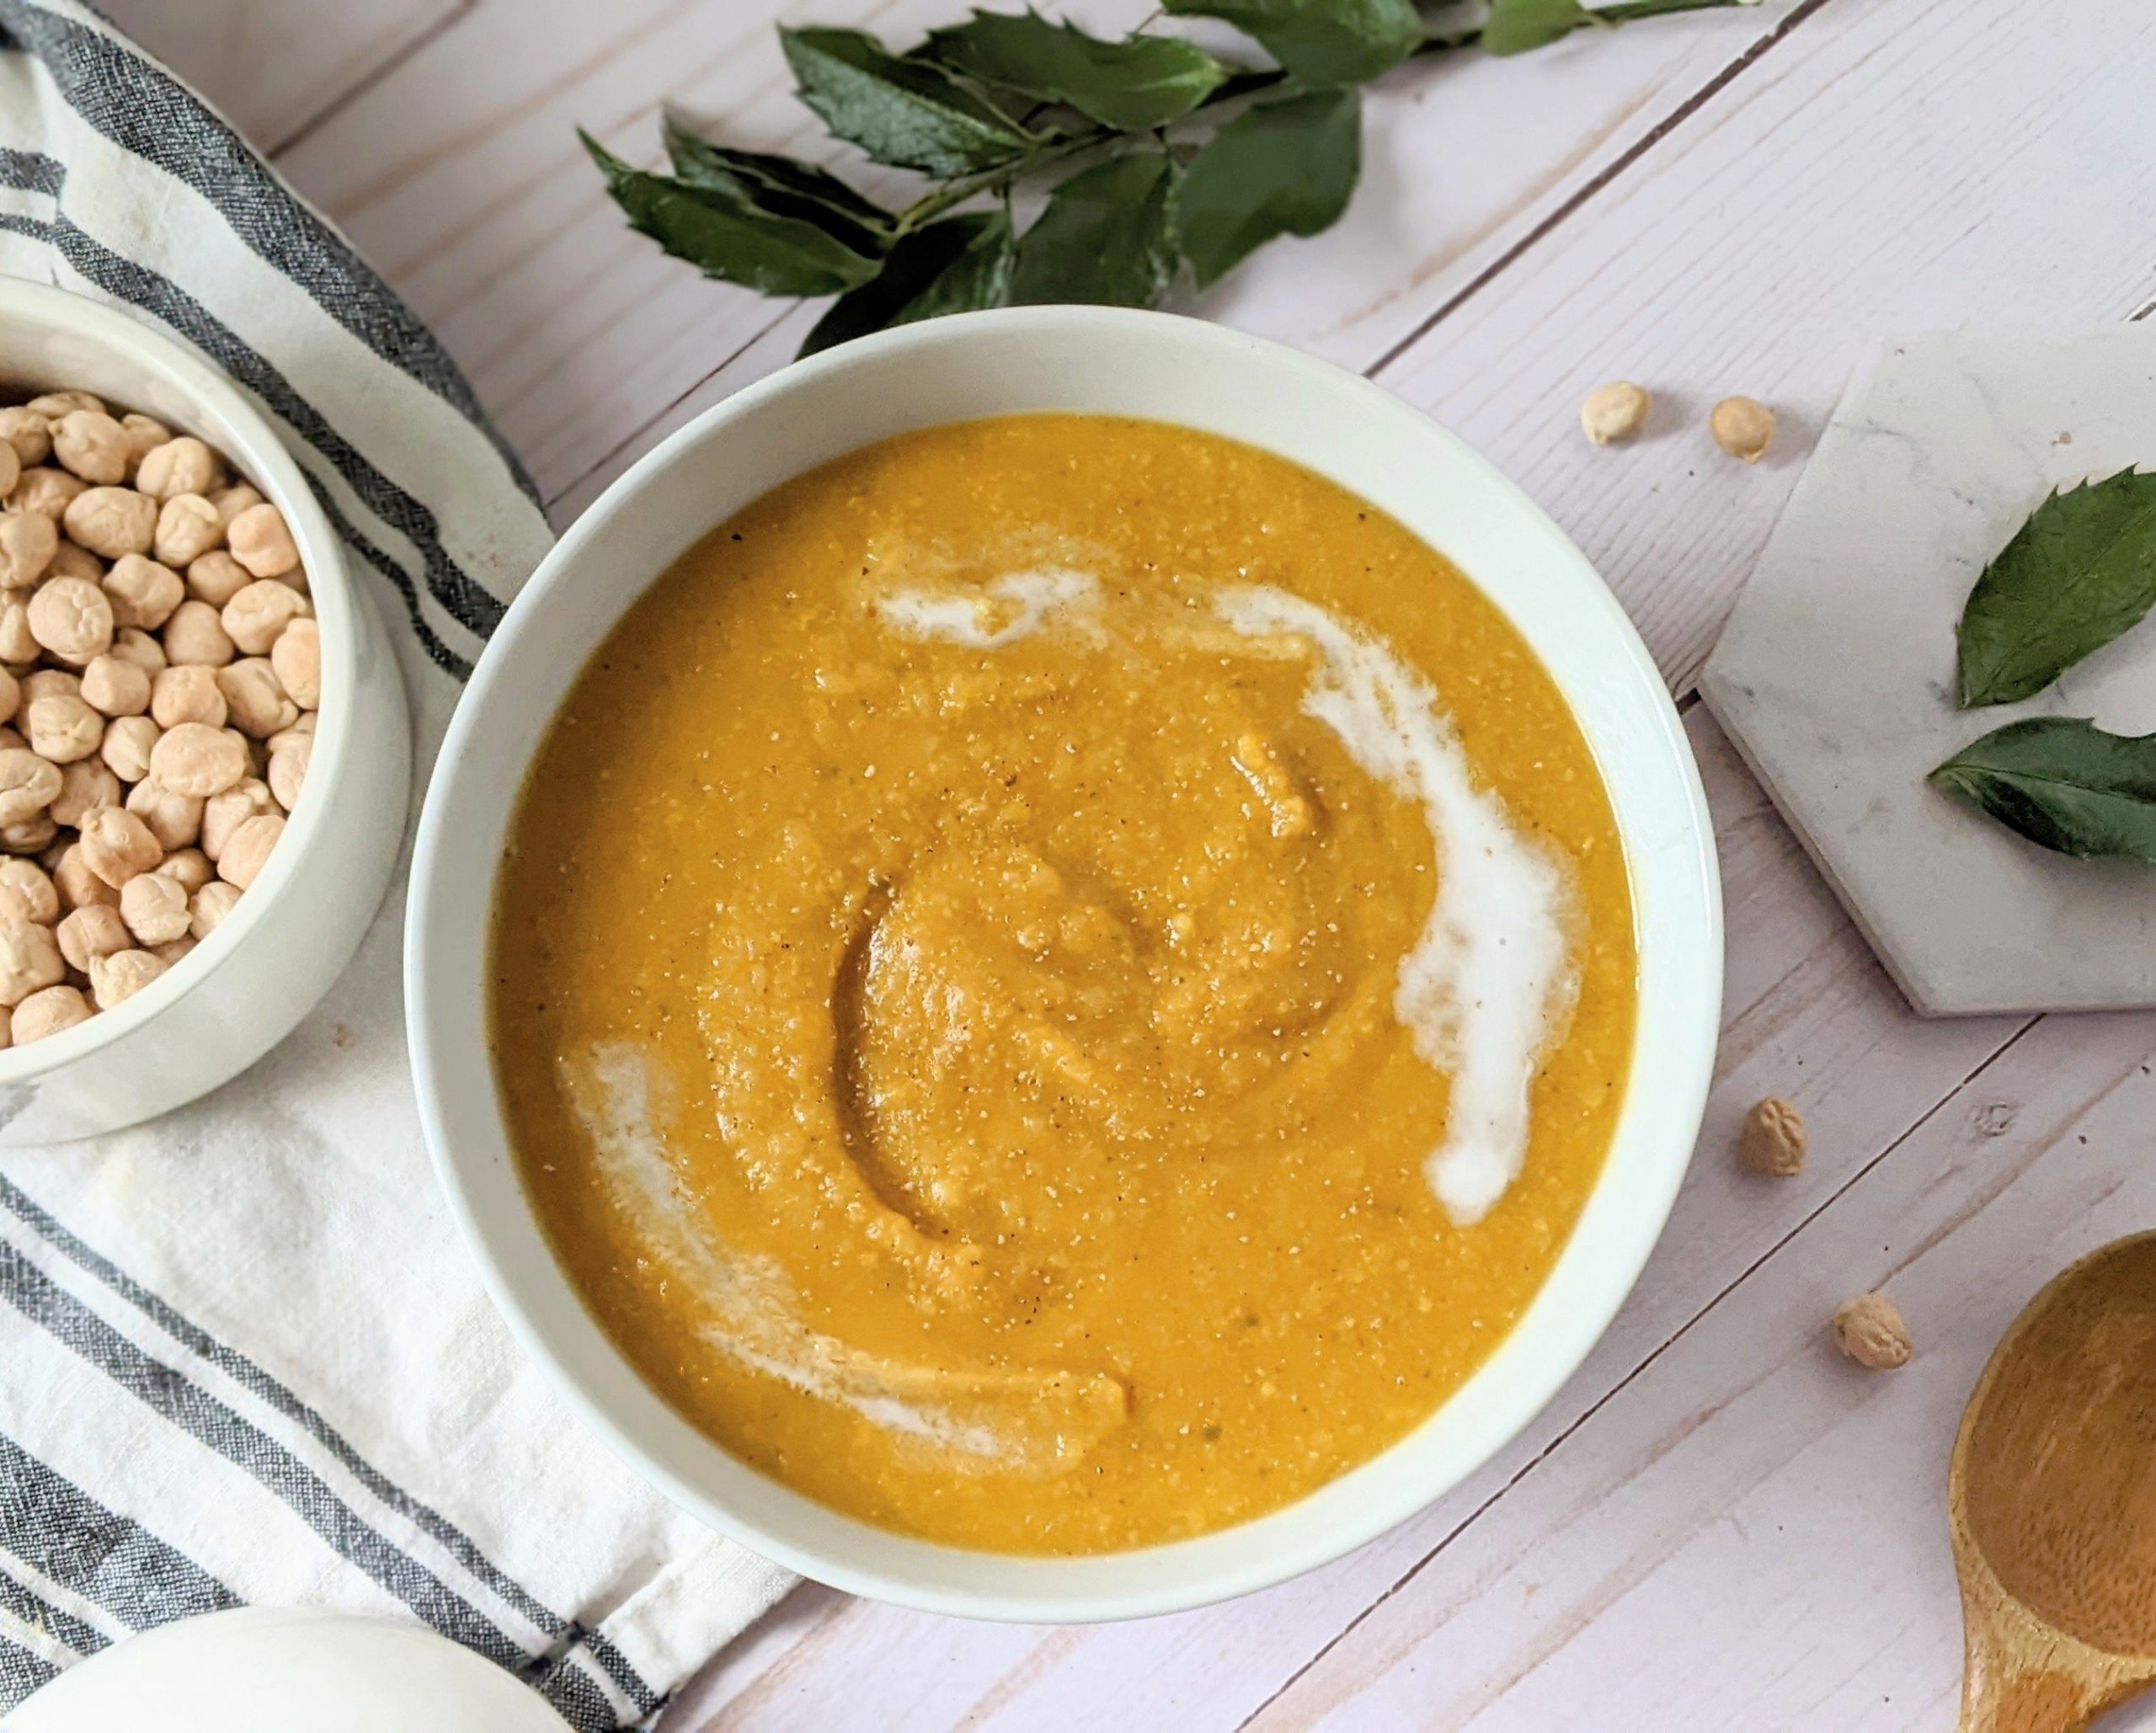 carrot carbanzo bean soup recipe creamy chickpea and carrot stew healthy blended soups elegant vegan soup recipes for veganuary 30 day vegan challenge recipes